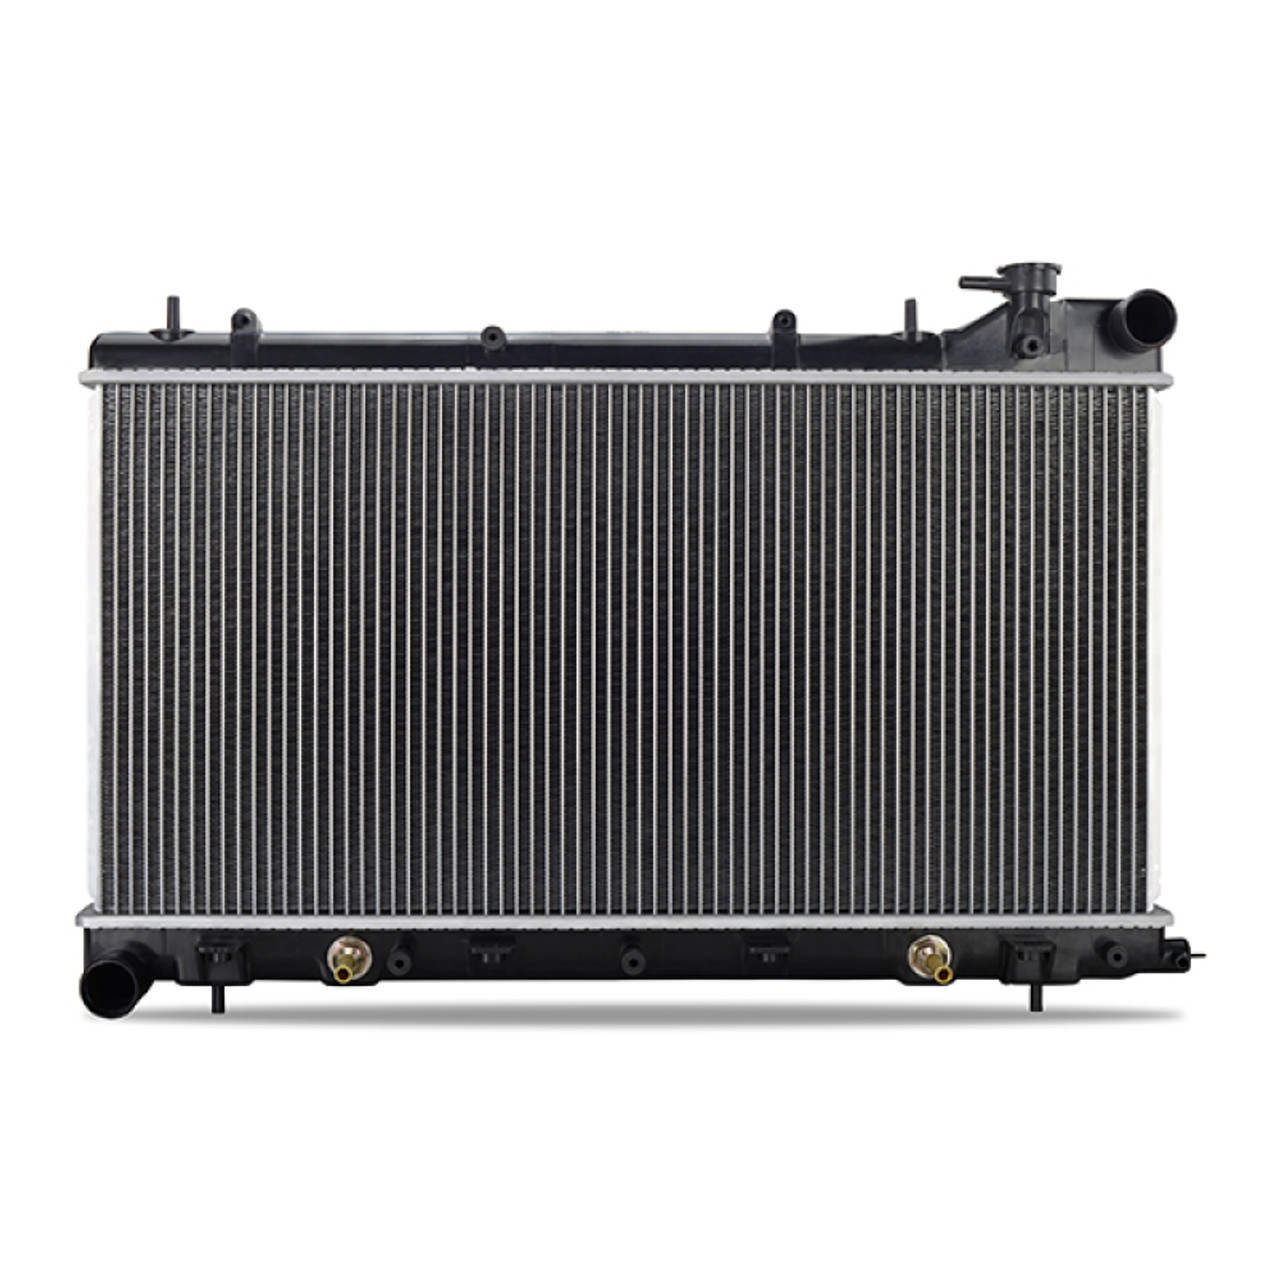 Mishimoto Subaru Forester Replacement Radiator 1998-2002 - R2402-AT - Back